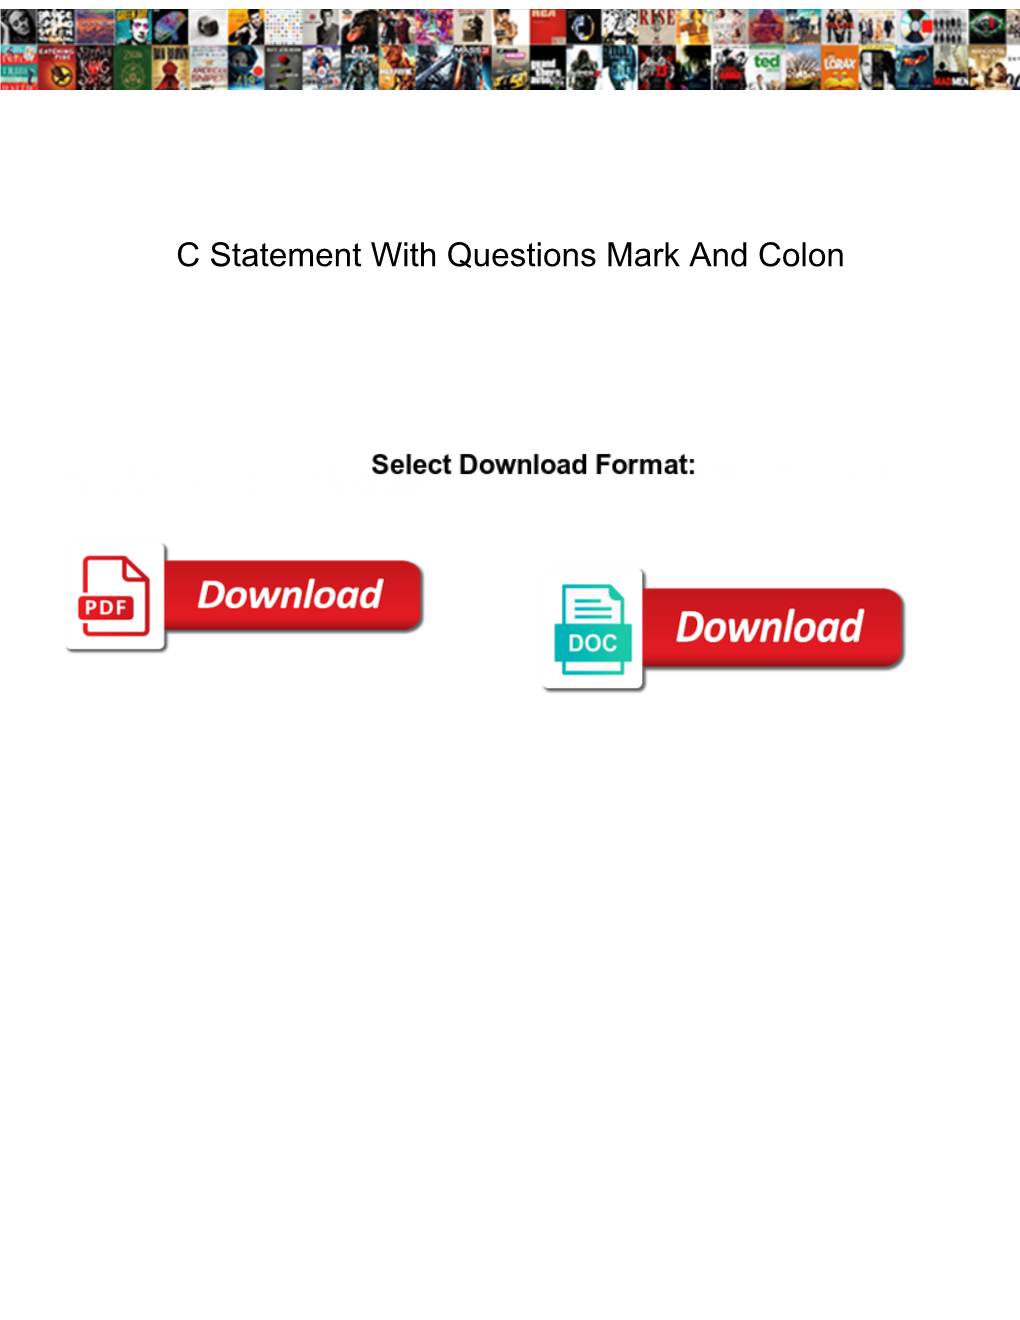 C Statement with Questions Mark and Colon